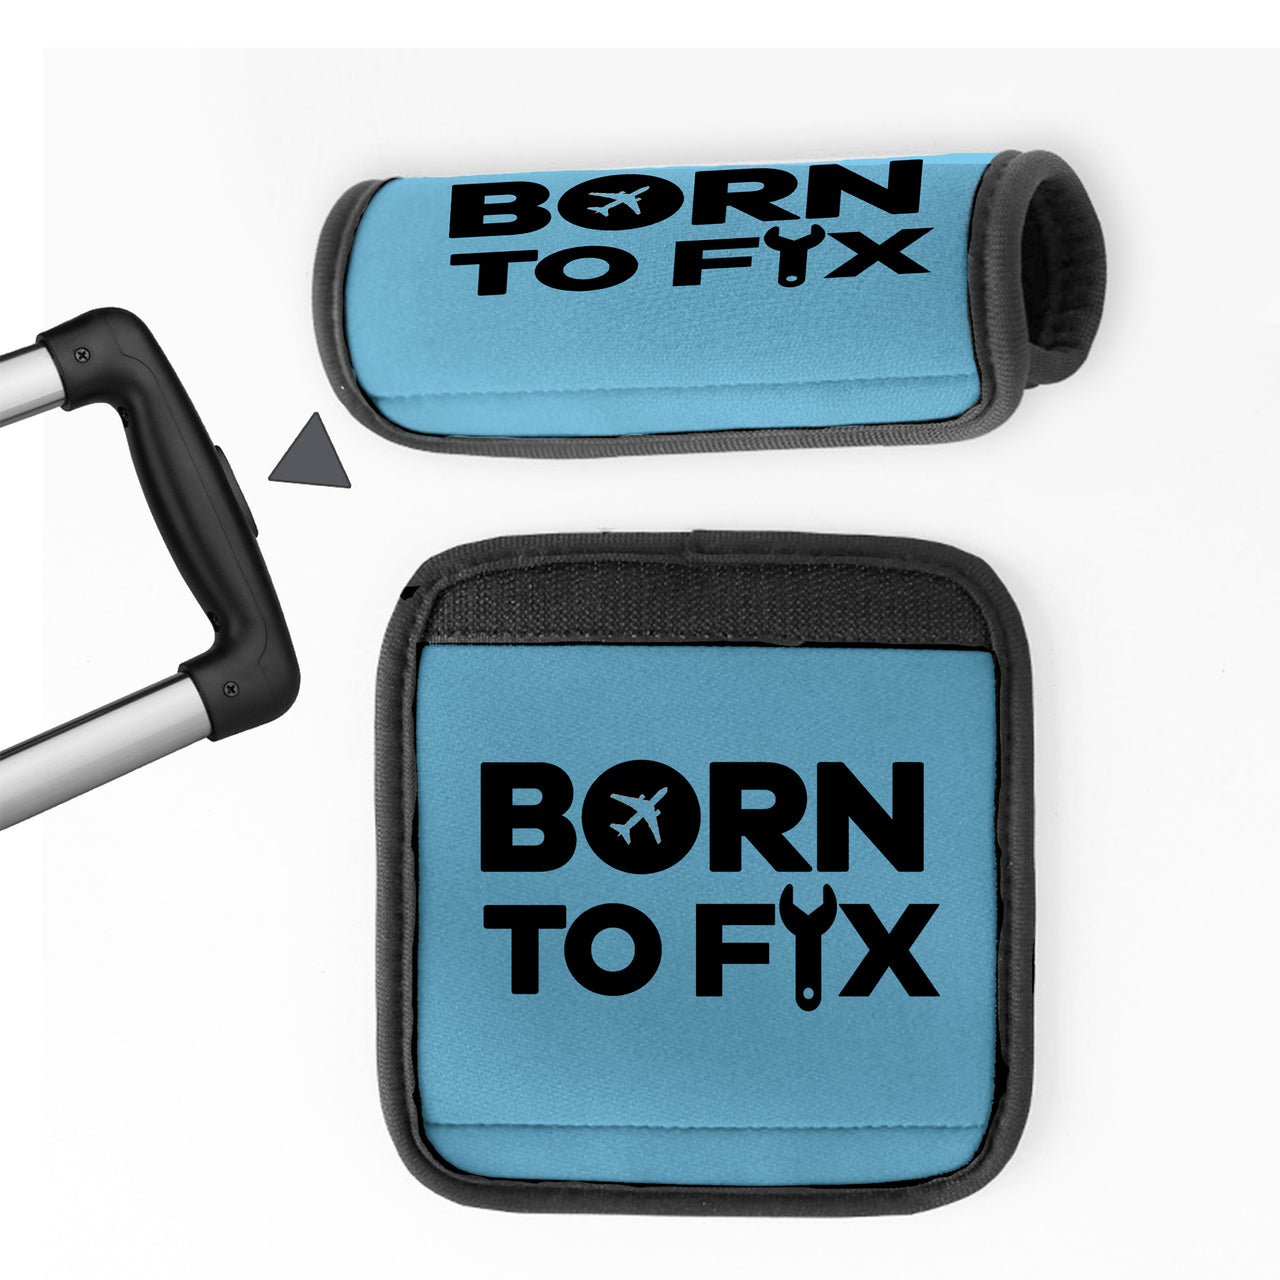 Born To Fix Airplanes Designed Neoprene Luggage Handle Covers